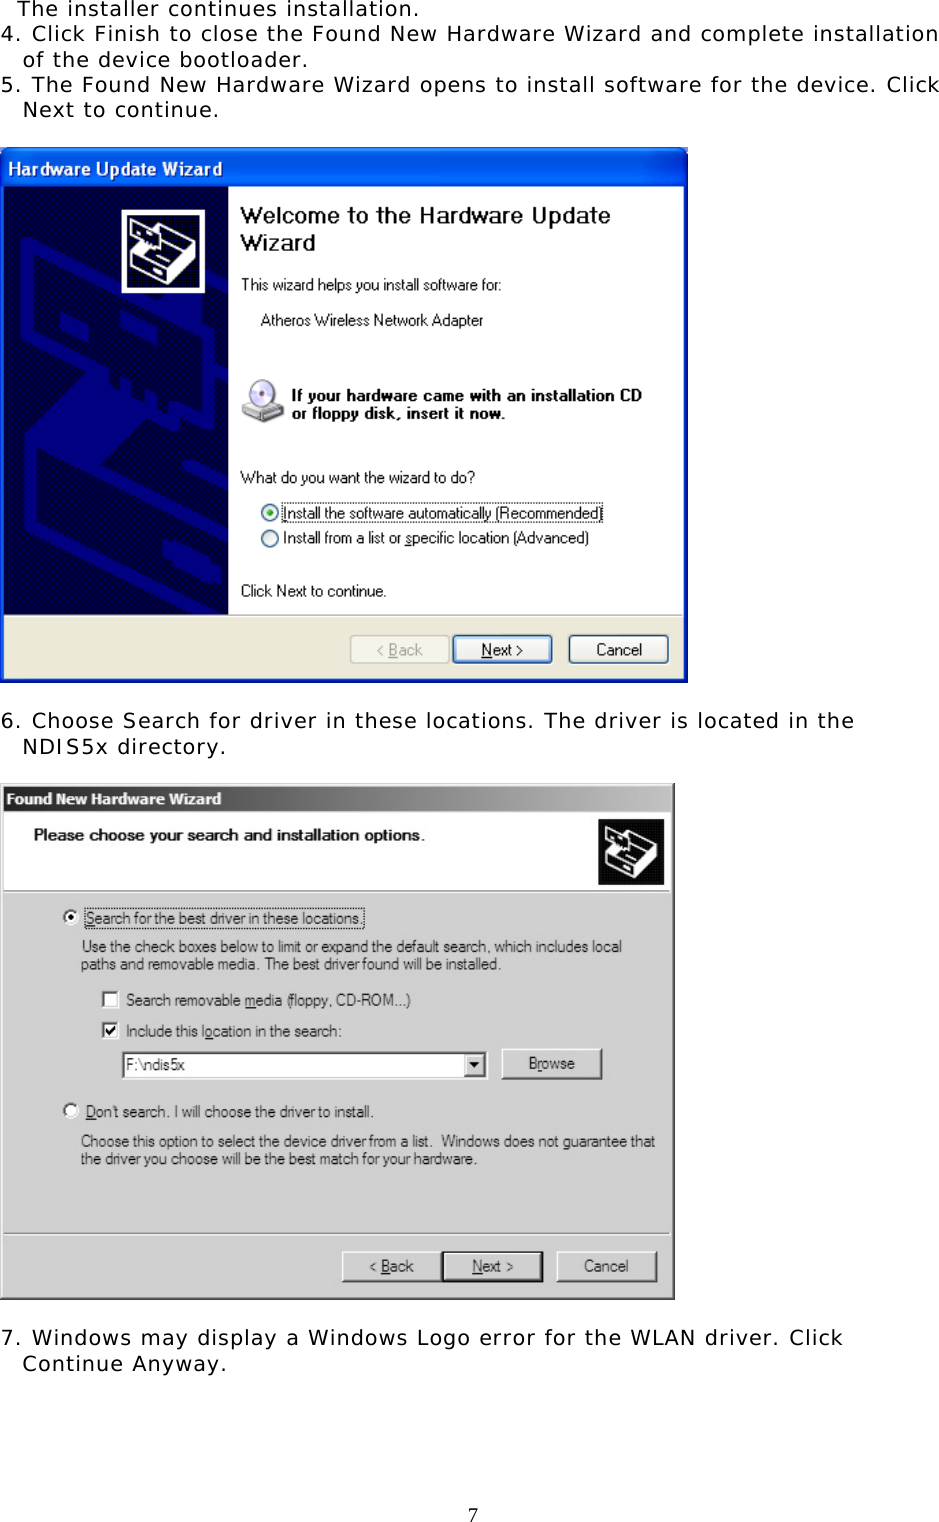  7   The installer continues installation. 4. Click Finish to close the Found New Hardware Wizard and complete installation of the device bootloader.  5. The Found New Hardware Wizard opens to install software for the device. Click Next to continue.    6. Choose Search for driver in these locations. The driver is located in the NDIS5x directory.    7. Windows may display a Windows Logo error for the WLAN driver. Click Continue Anyway.  